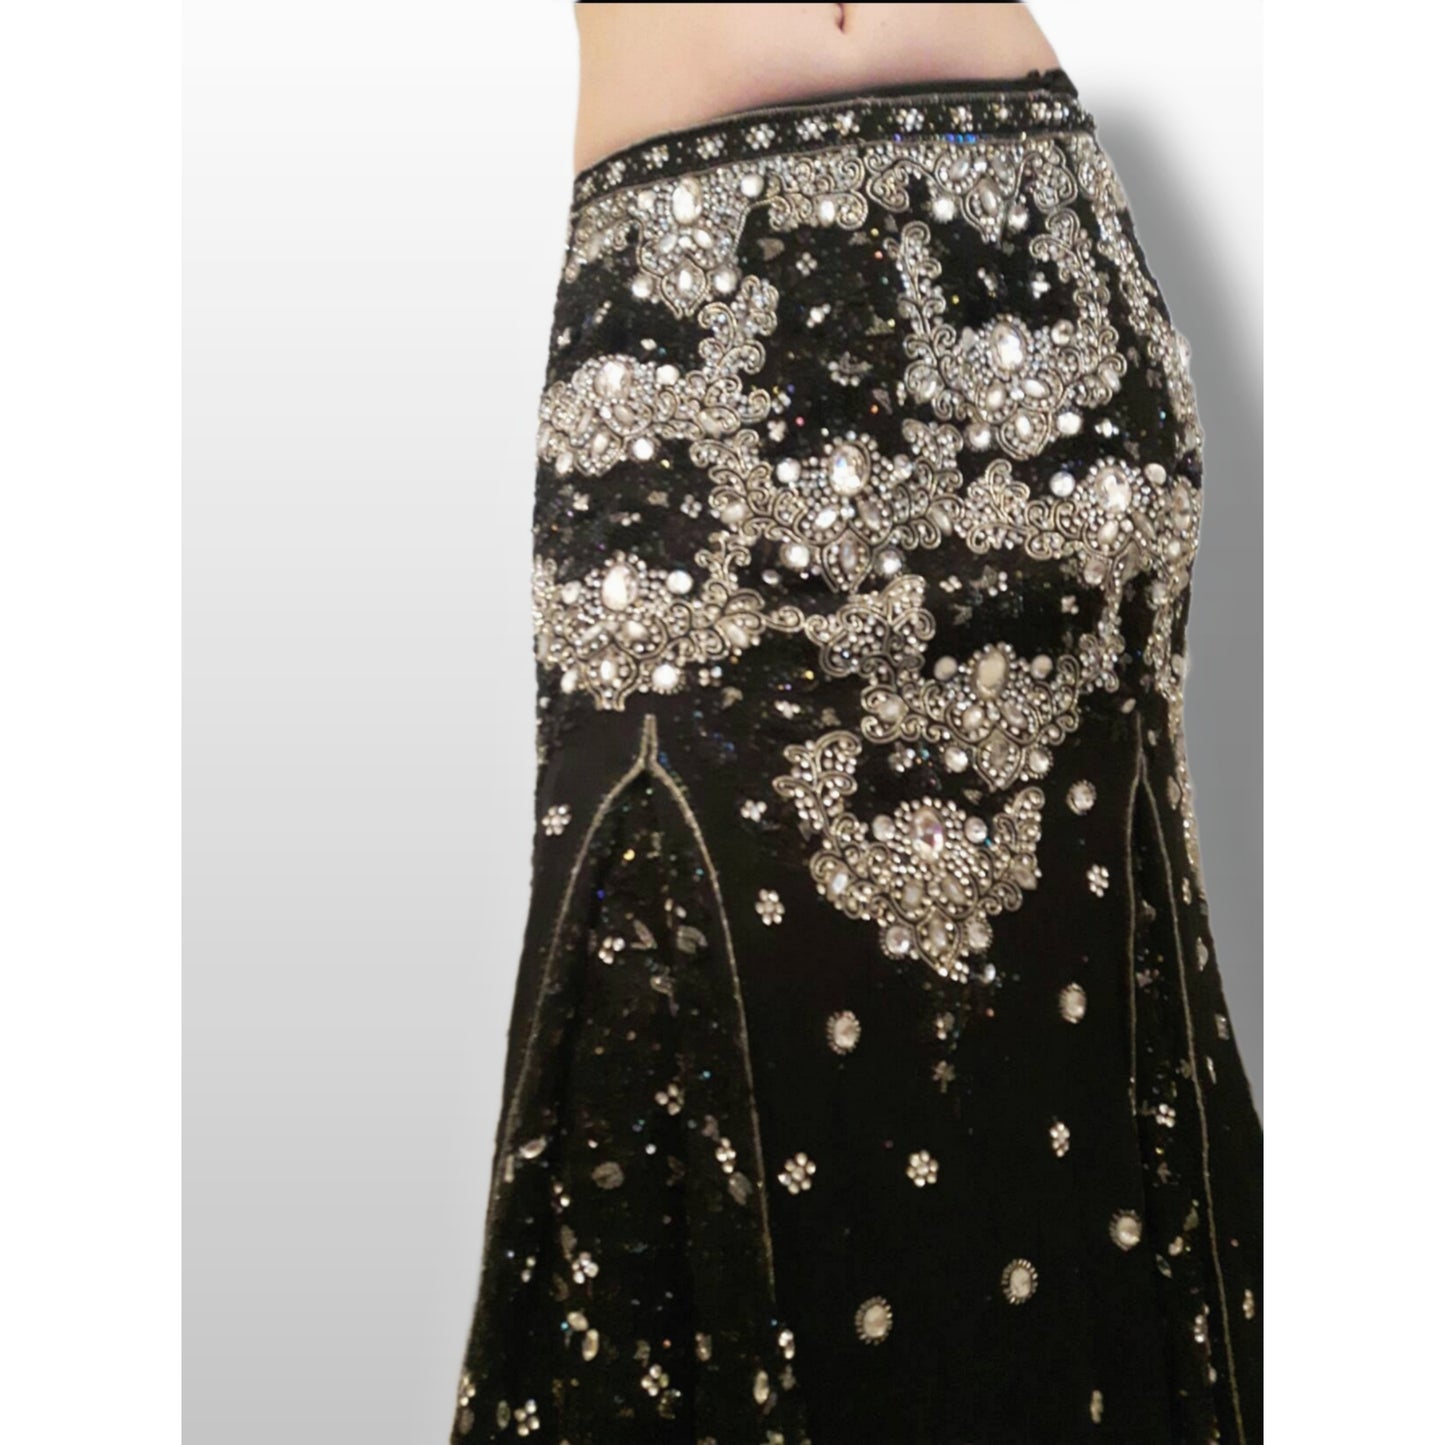 Top quality vintage lengha skirt and choli top in silver and black with beautiful crystal hand embroidery and irredecent sequins (size M)